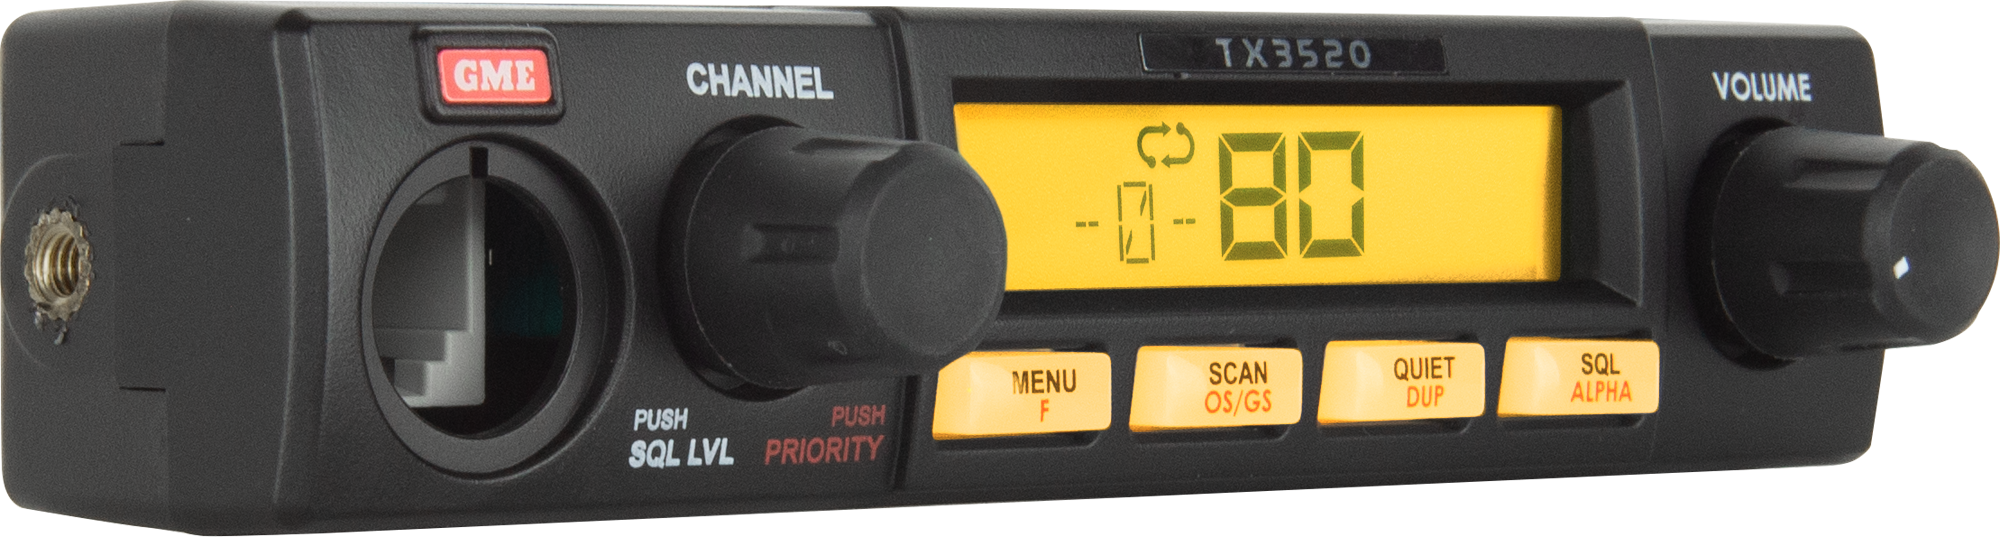 5 Watt, Compact Fully Featured Remote Mount Uhf Cb Radio With Scansuite